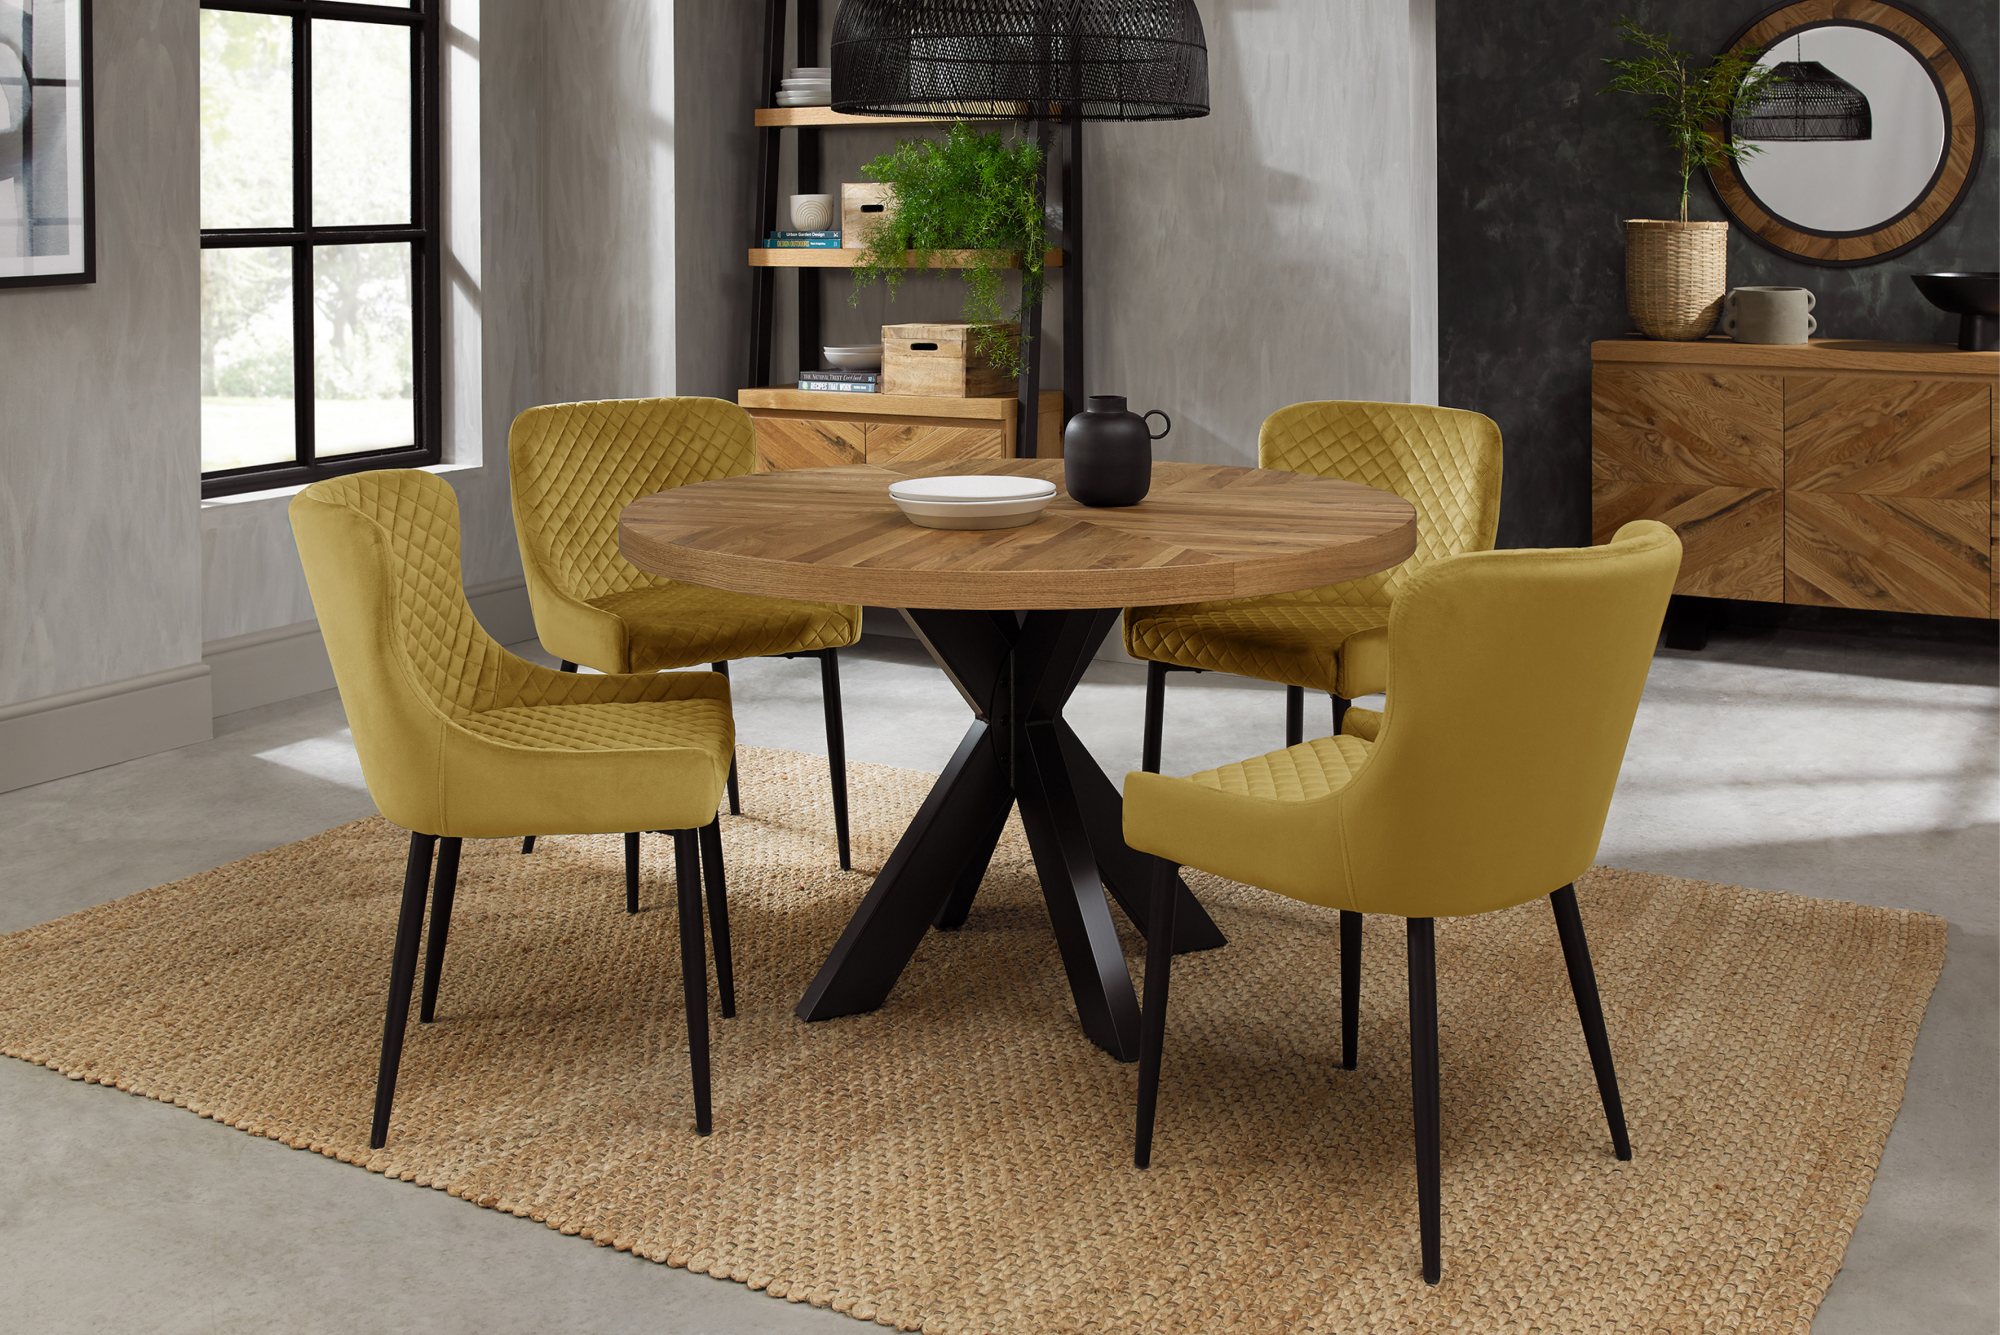 Home Origins Bosco Rustic Oak 4 seater dining table with 4 Cezanne chairs- mustard velvet fabric